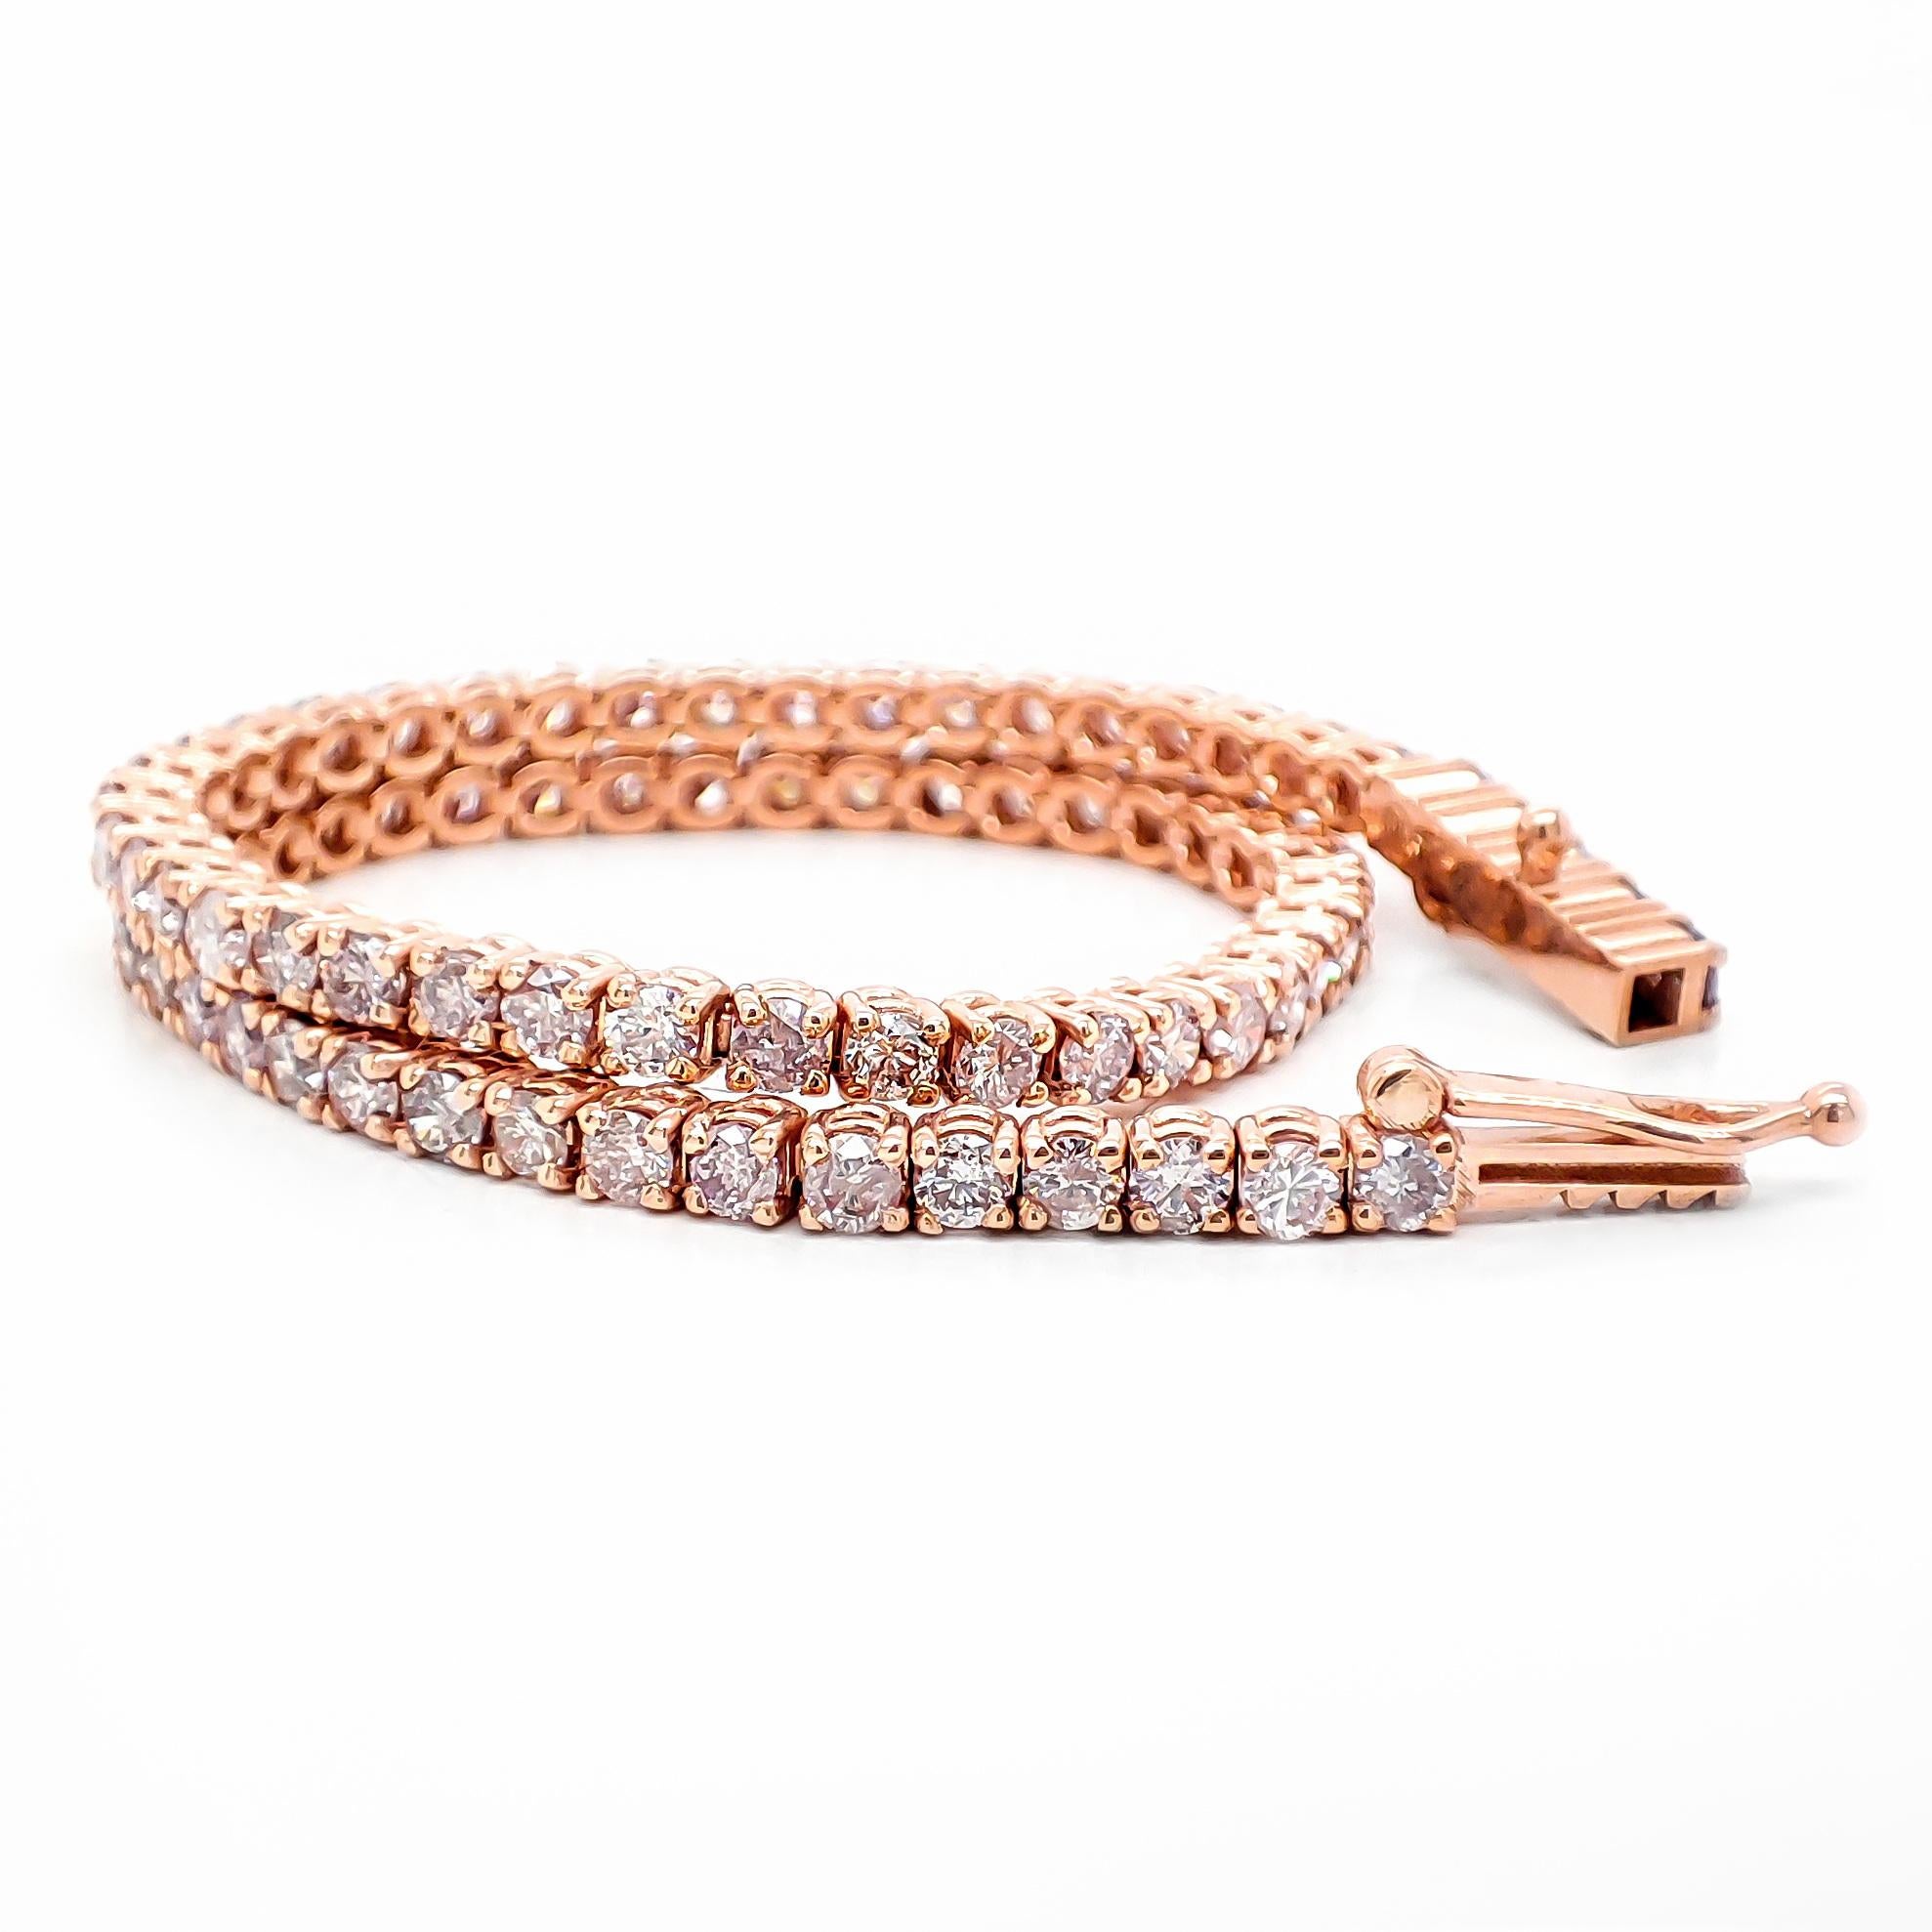 FOR CUSTOMERS FROM THE USA NO VAT

Adorned with 78 round brilliant diamonds totaling 3.45 carats in fancy pink, which is very rare and unique, this stunning bracelet is a true work of art. Set in a 14kt rose gold bracelet, it exudes a delicate and